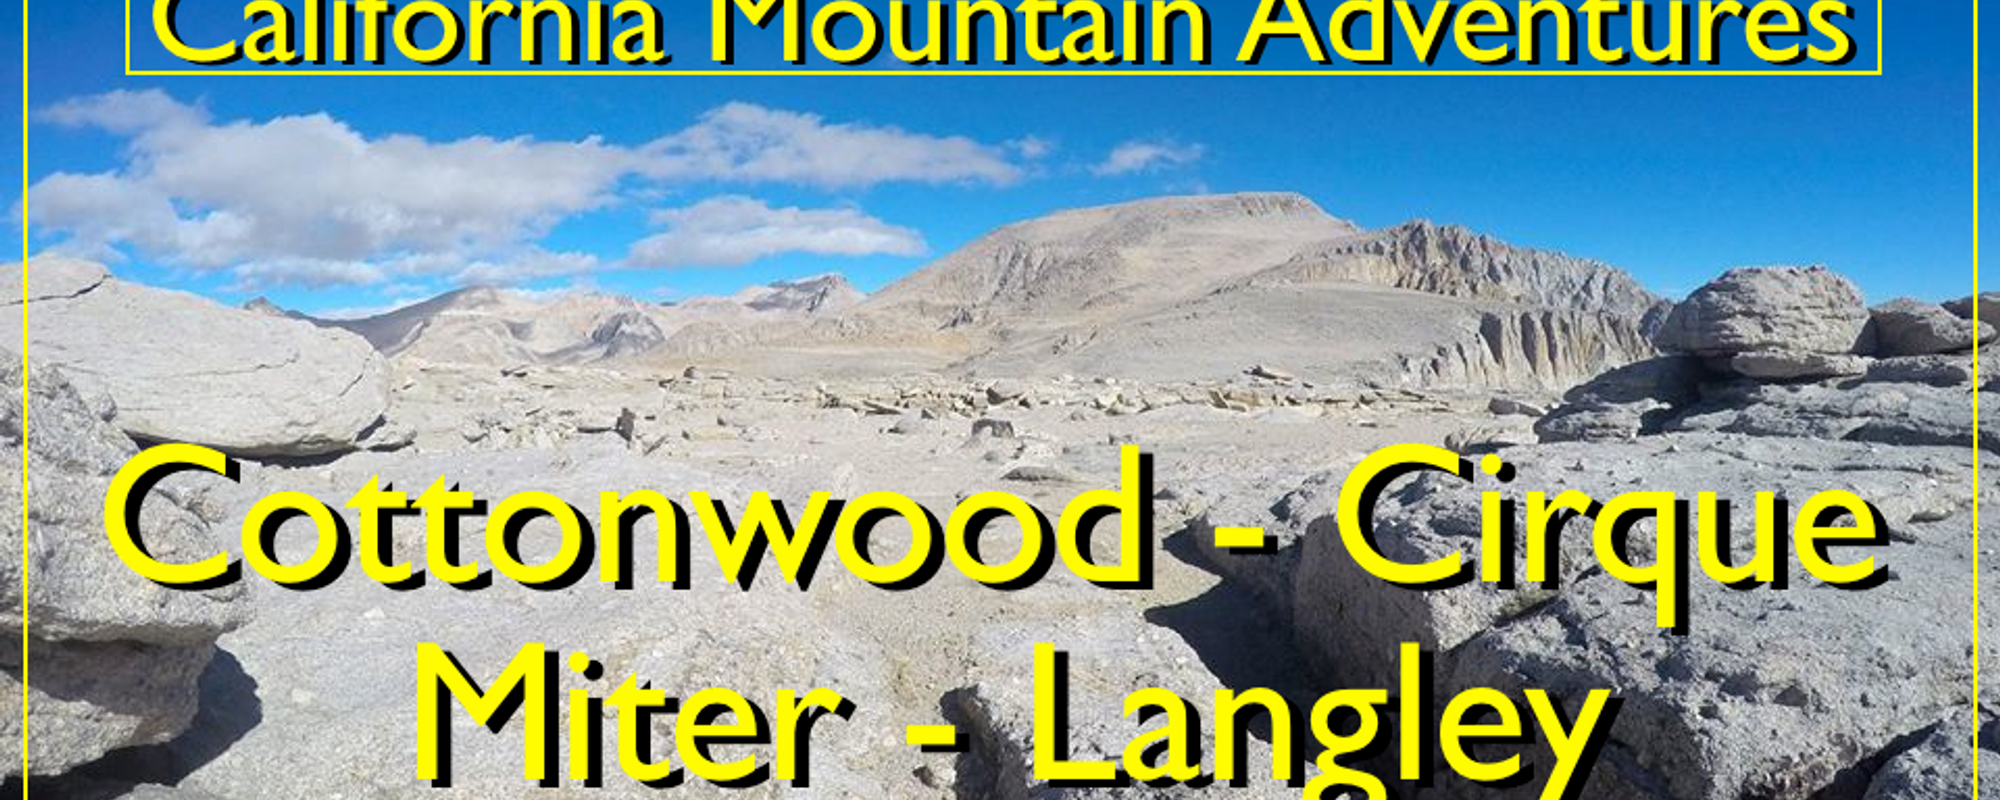 California Mountain Adventures - Cottonwood, Cirque, Miter, and Langley